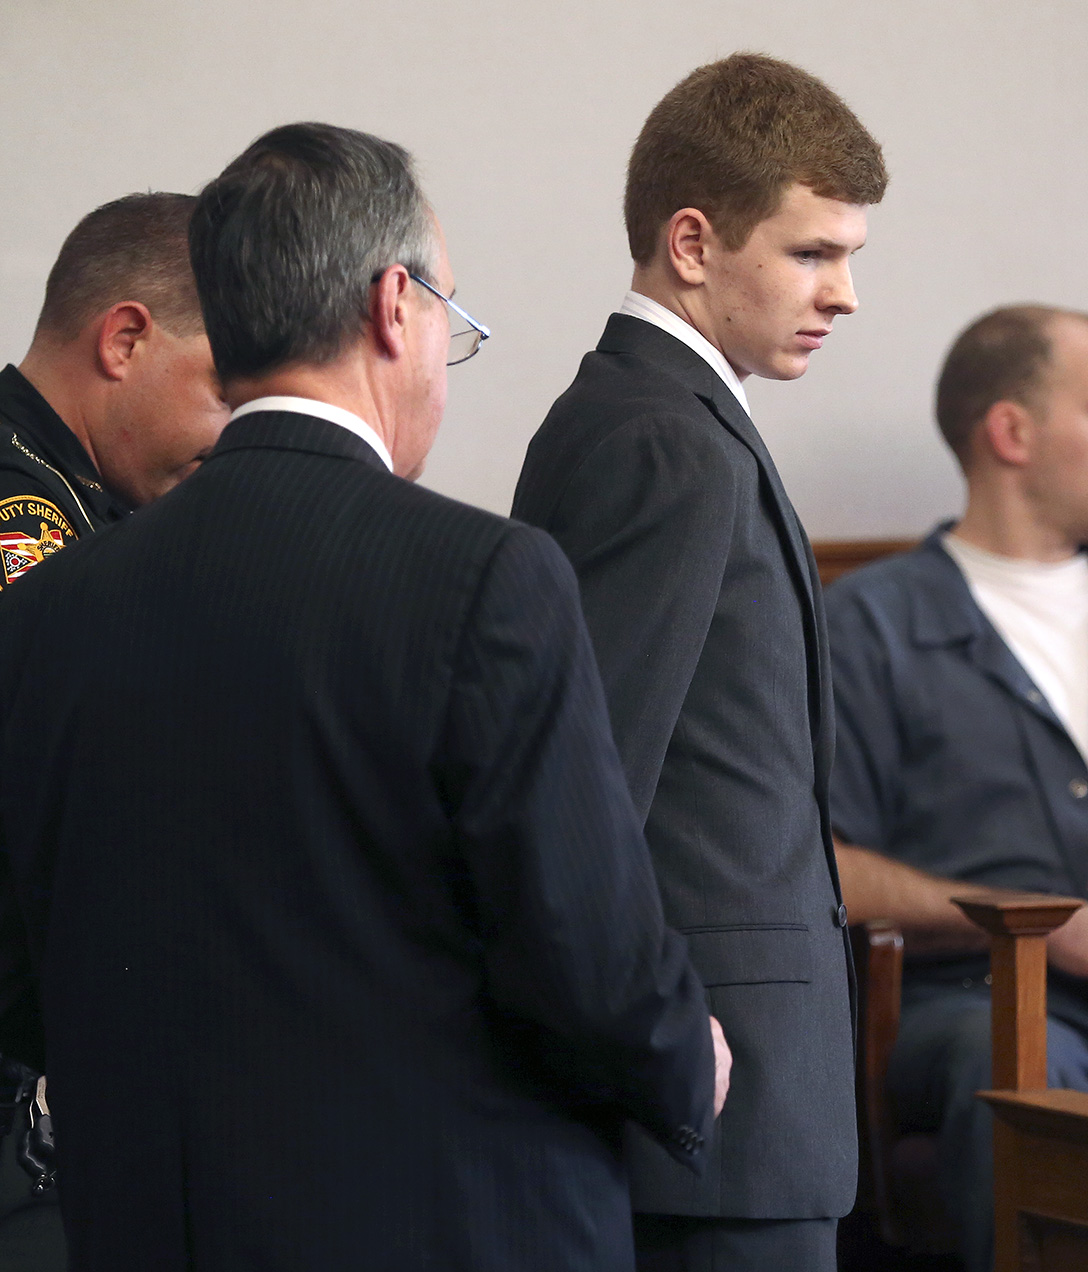 Student who caused burns given jail time - The Blade